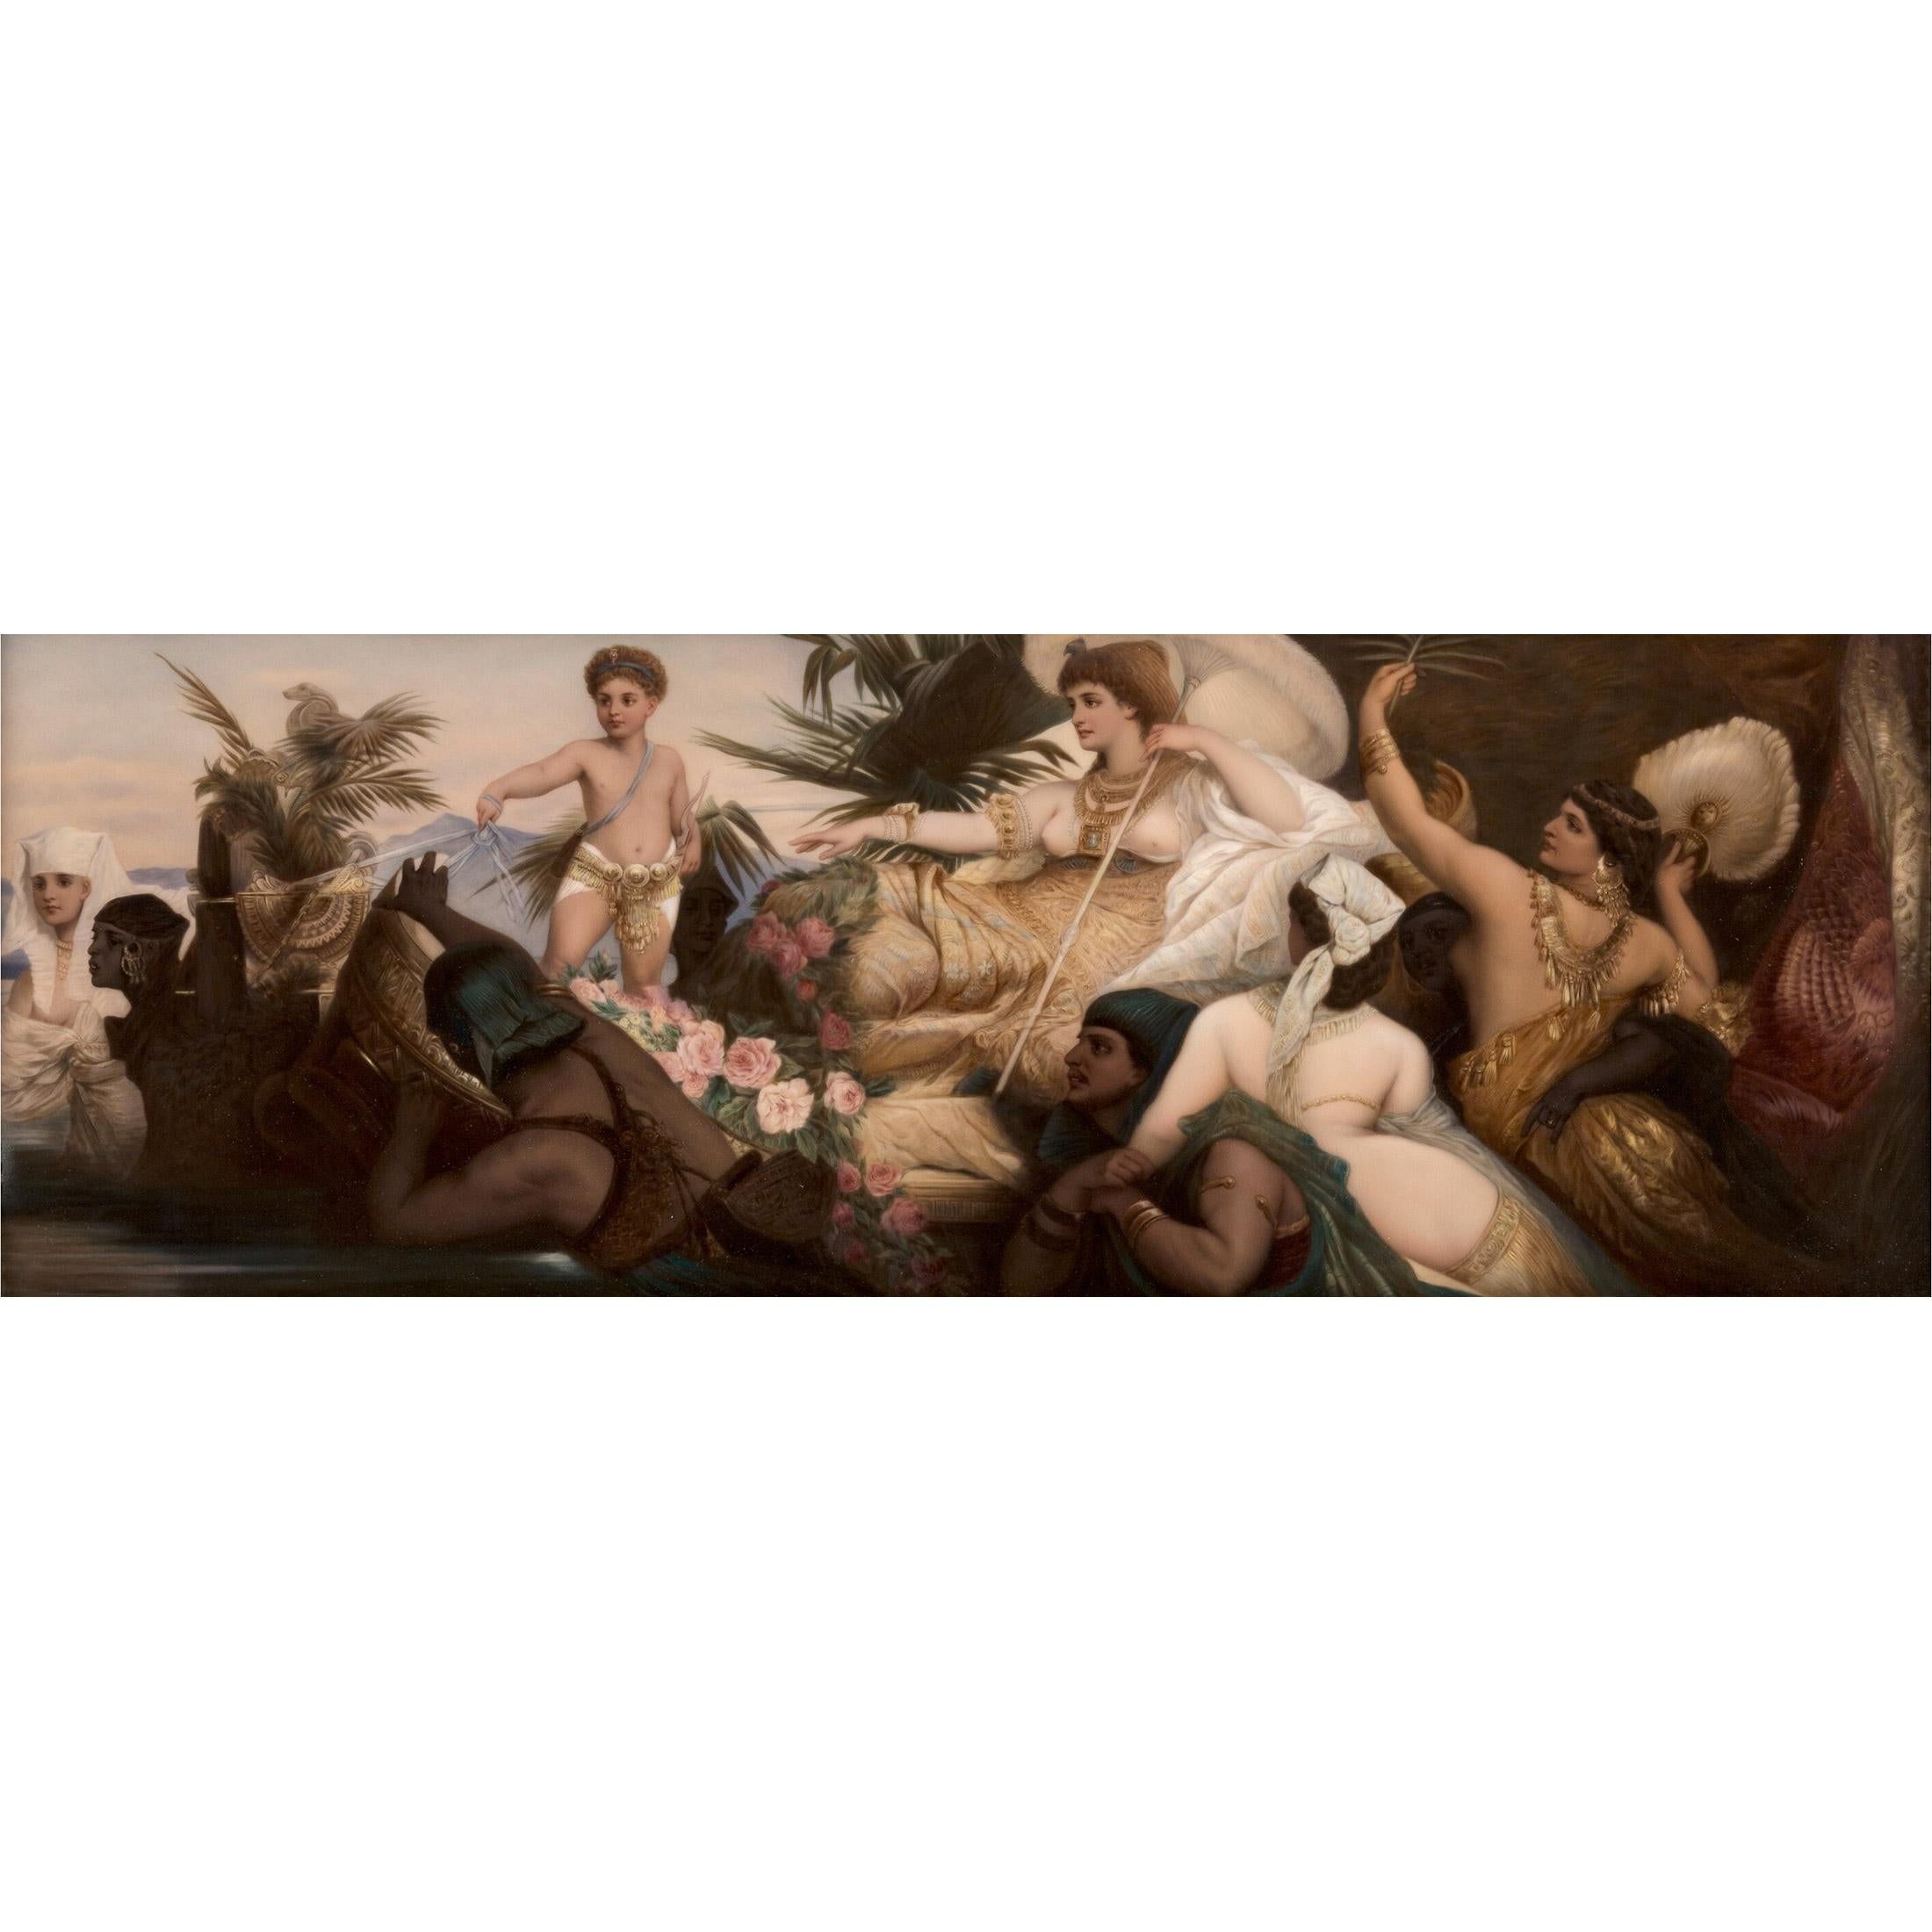 A fine quality KPM hand painted porcelain plaque in carved giltwood frame depicting Cleopatra on the Nile.

Artist: After Hans Makart 
Origin: German
Date: late 19 century
Dimension: Framed 15 1/4 x 29 inches; plaque 7 1/4 x 21 inches.